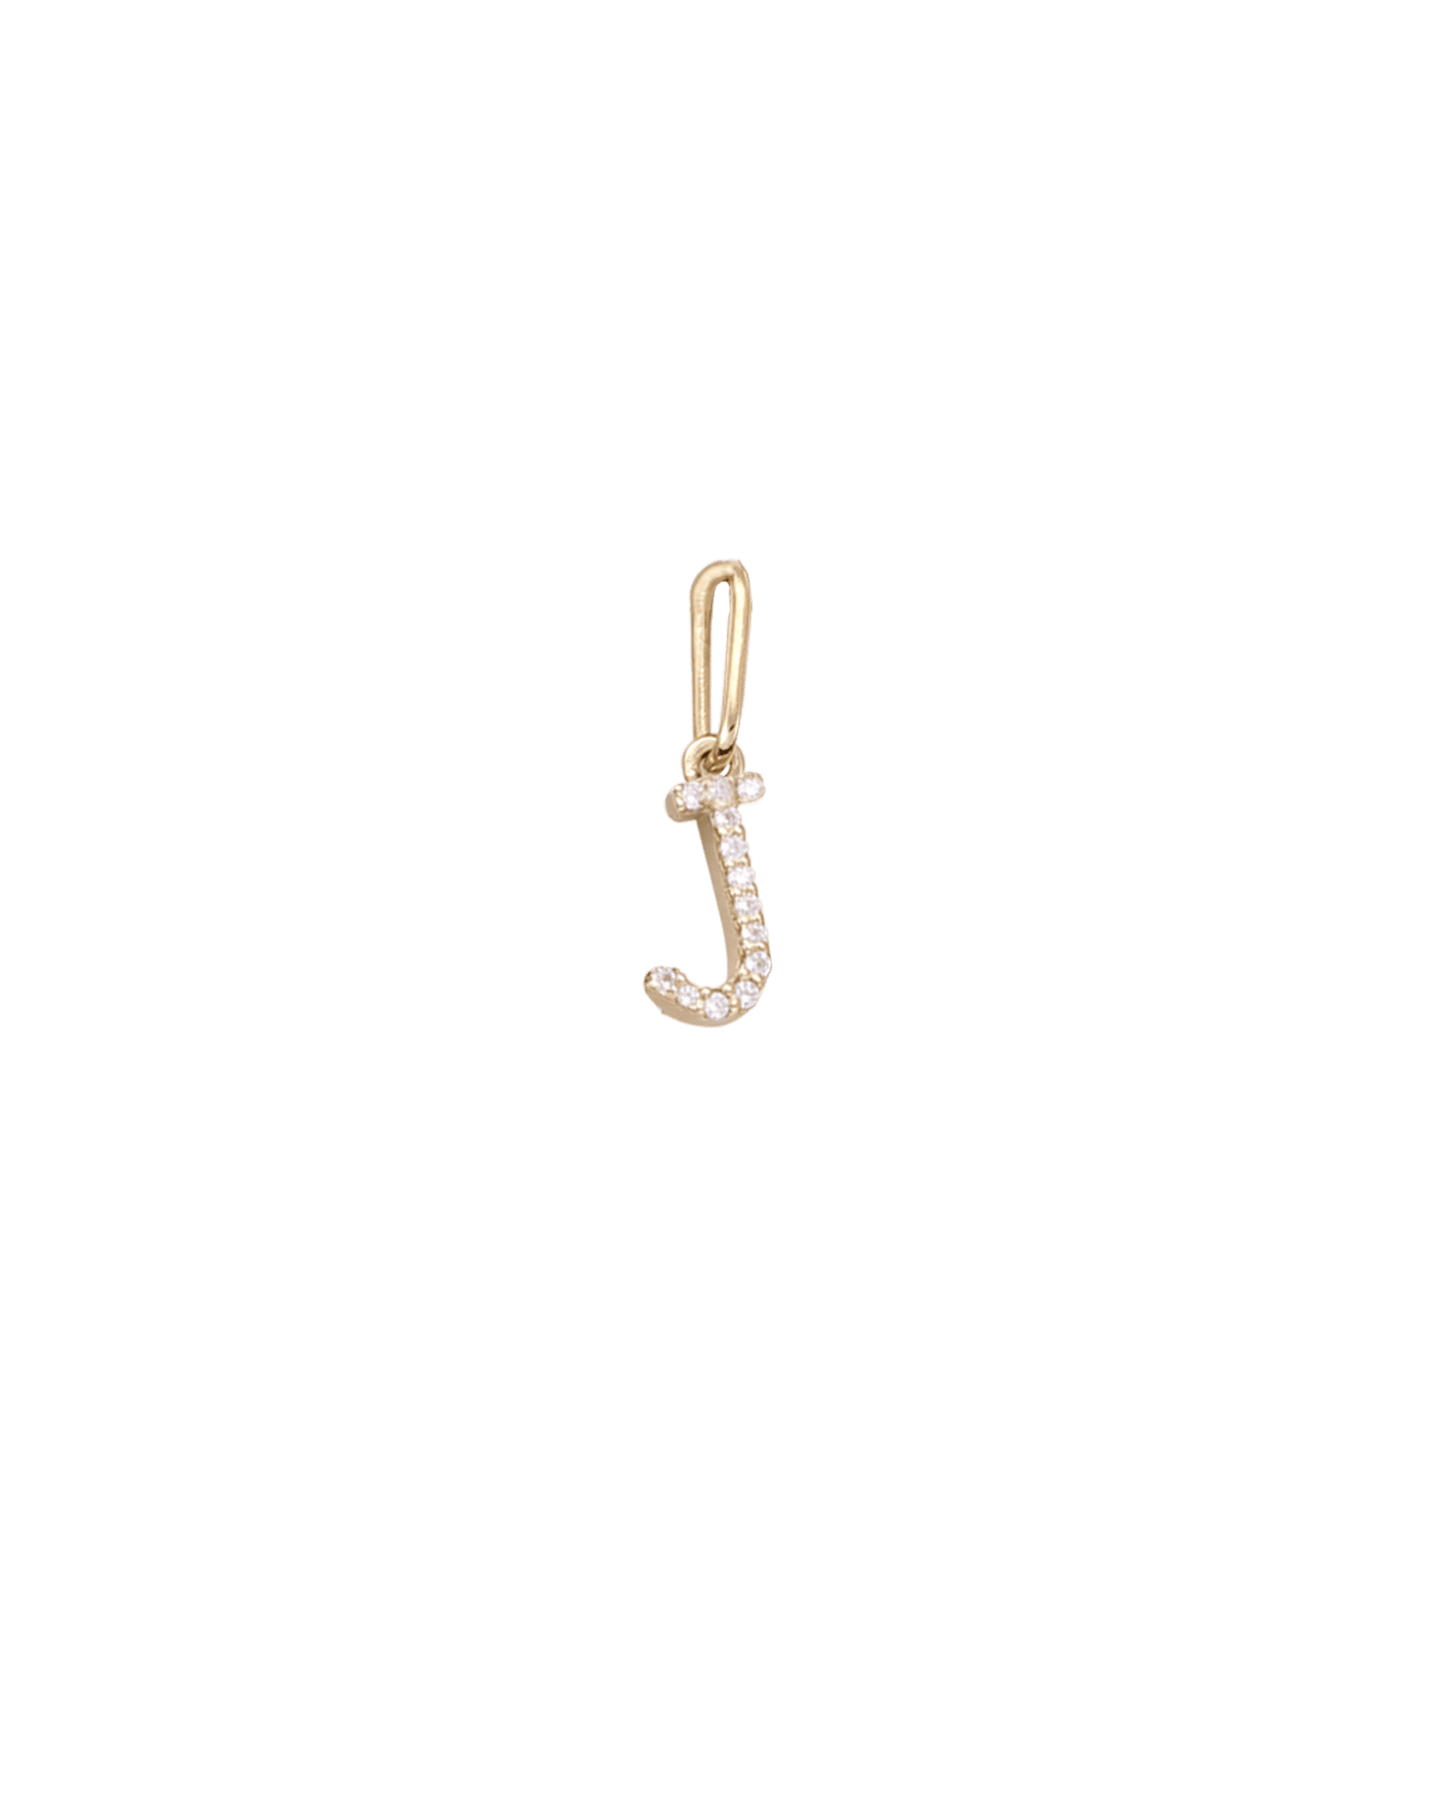 Frosted Charm - 18K Gold Vermeil Charm magal-dev 